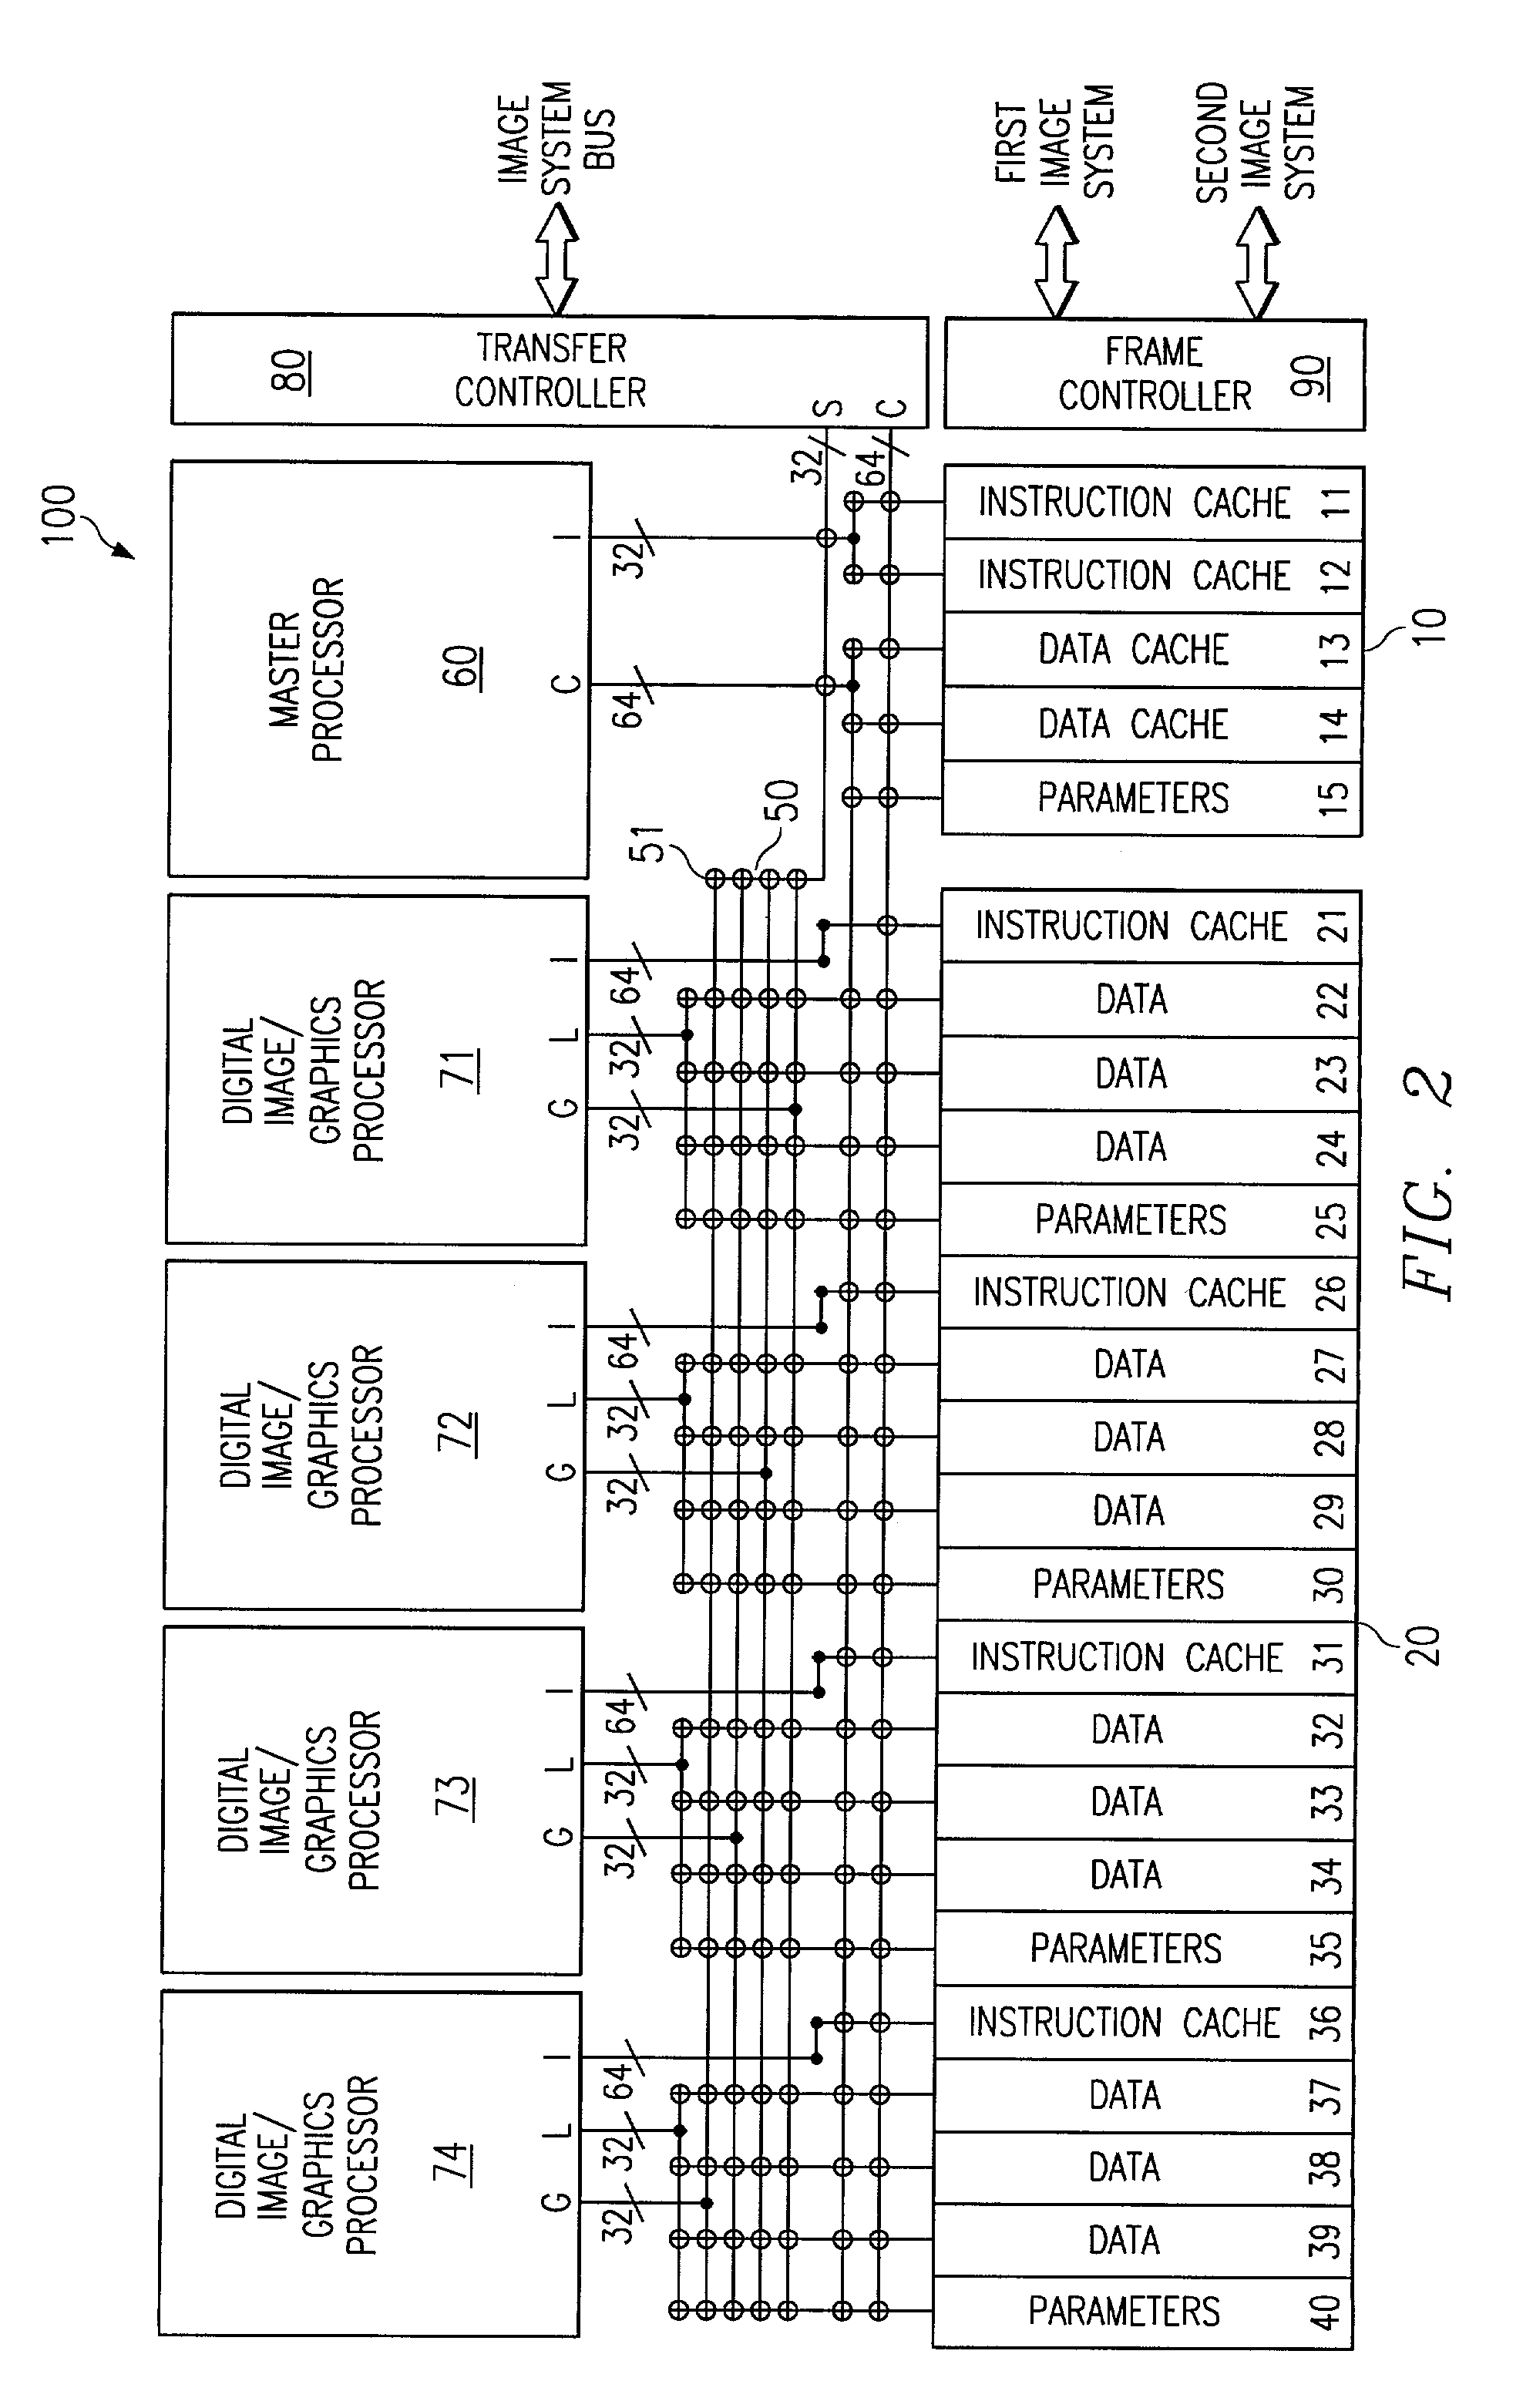 Long instruction word controlling plural independent processor operations